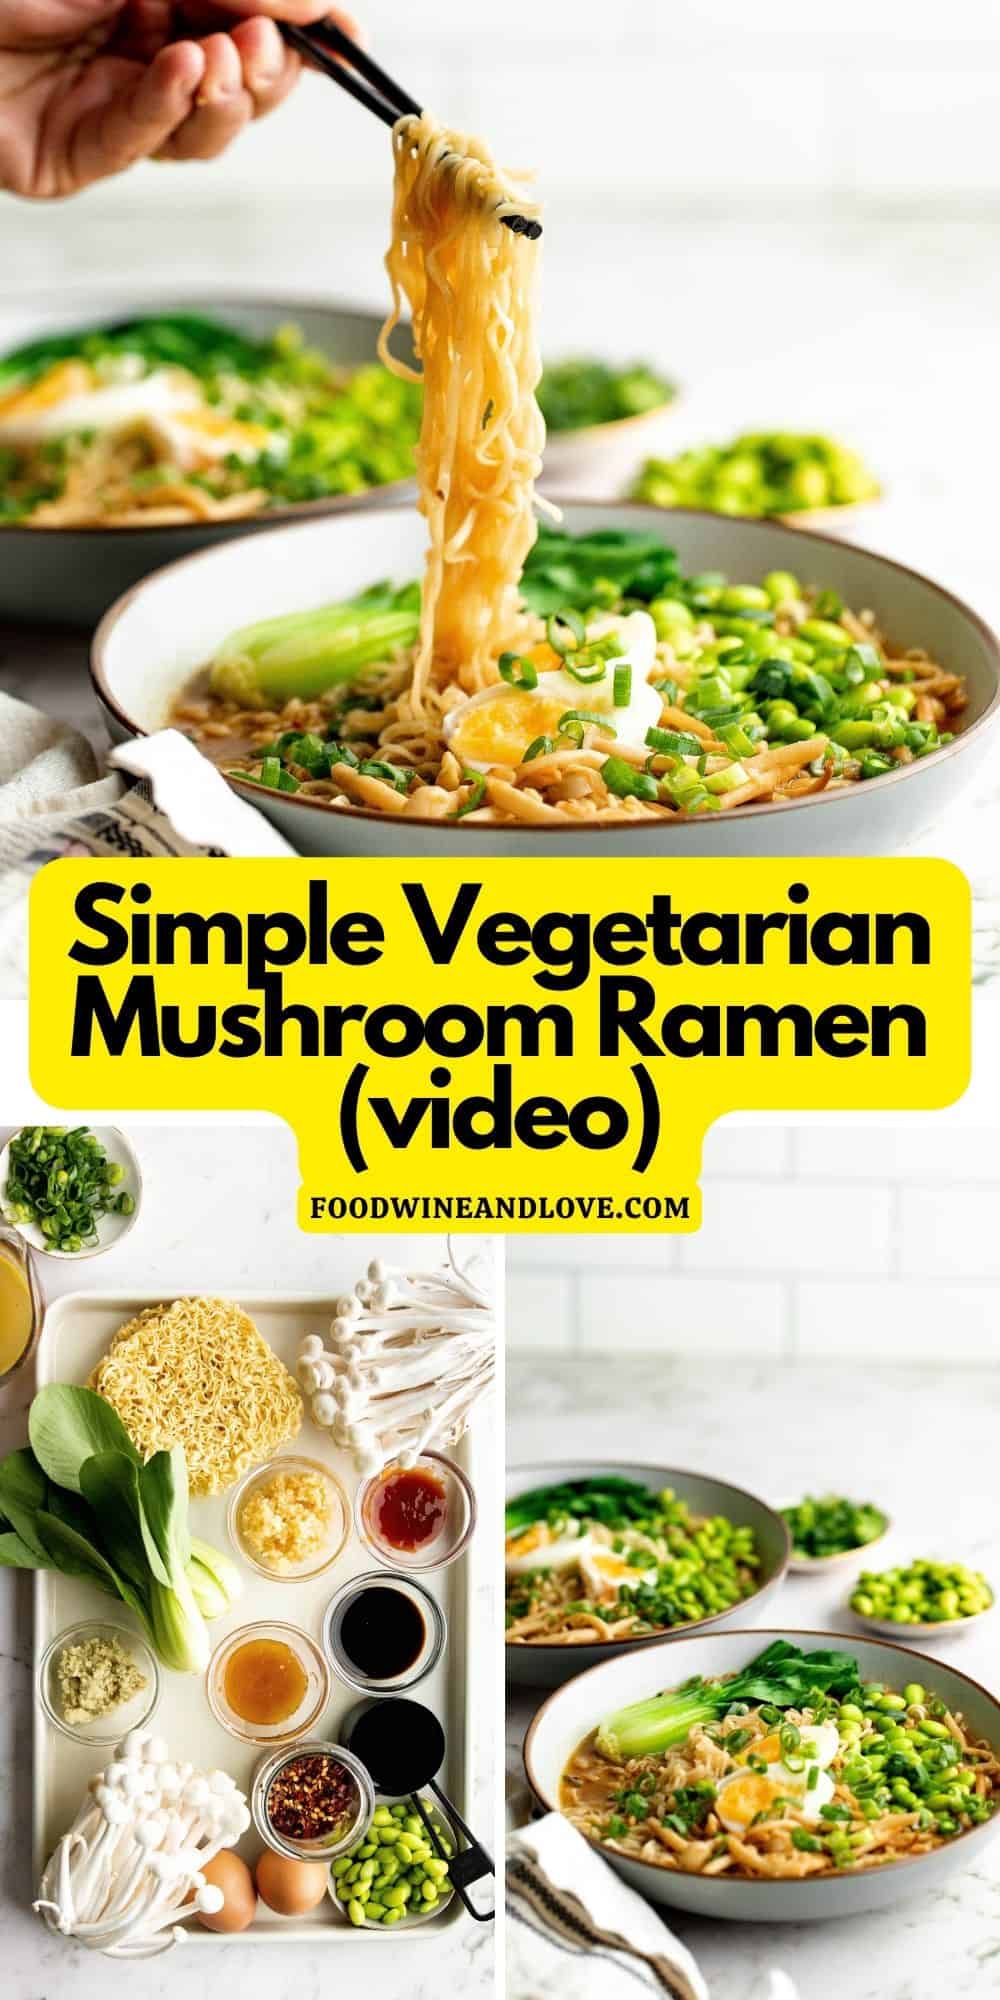 Simple Vegetarian Mushroom Ramen Bowl (video), a quick and delicious meal or appetizer recipe made with vegetarian ingredients. vegan option.